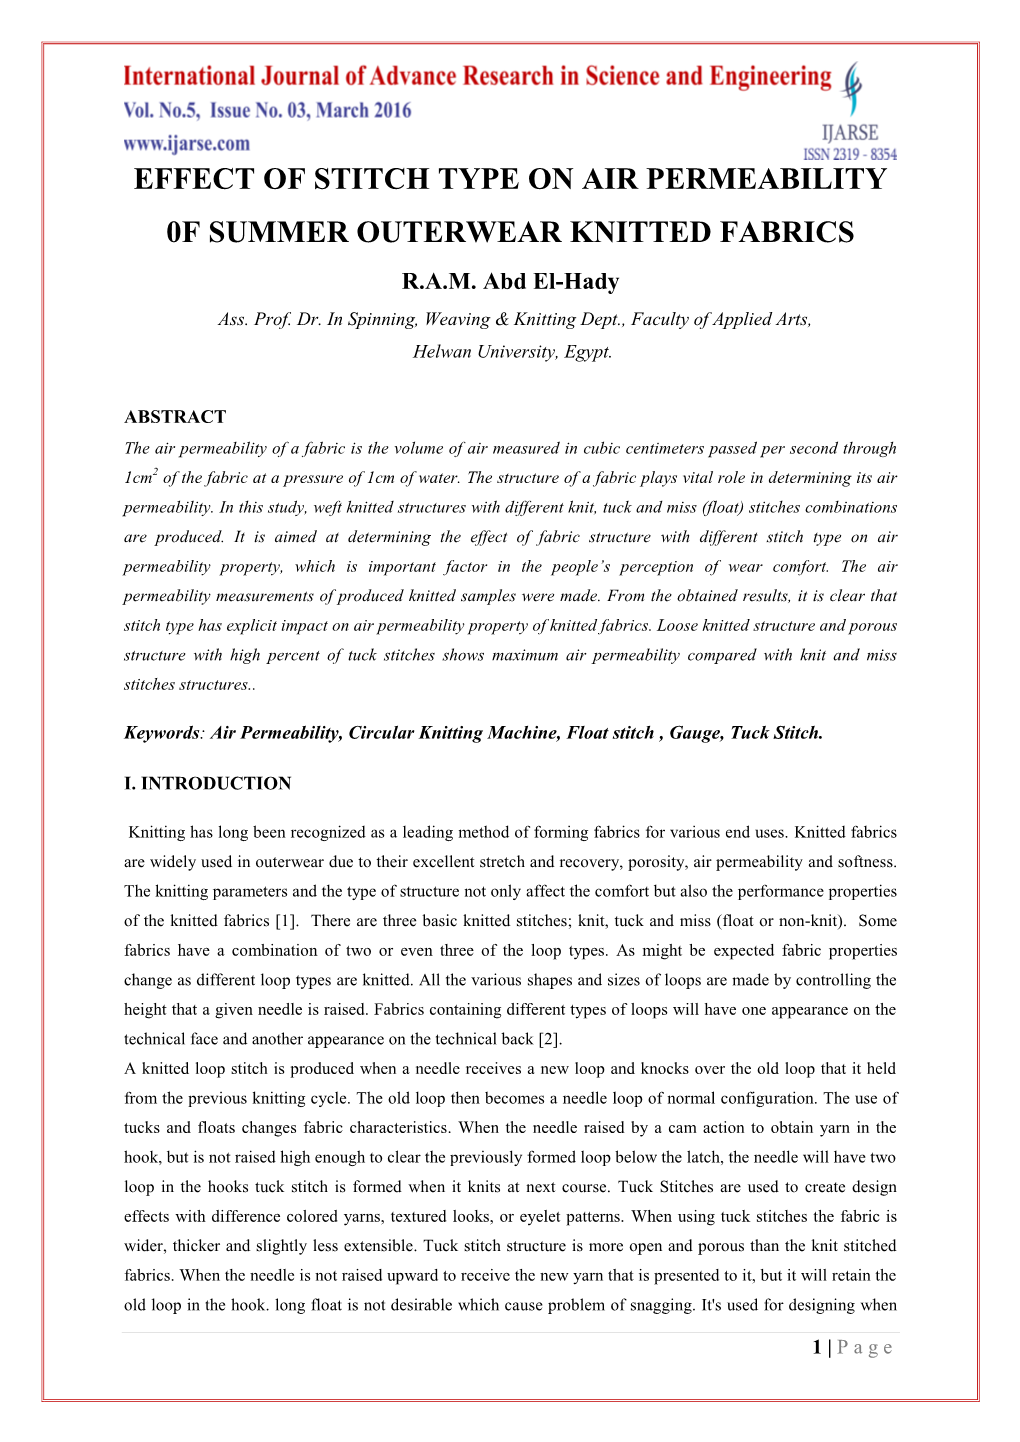 Effect of Stitch Type on Air Permeability 0F Summer Outerwear Knitted Fabrics R.A.M